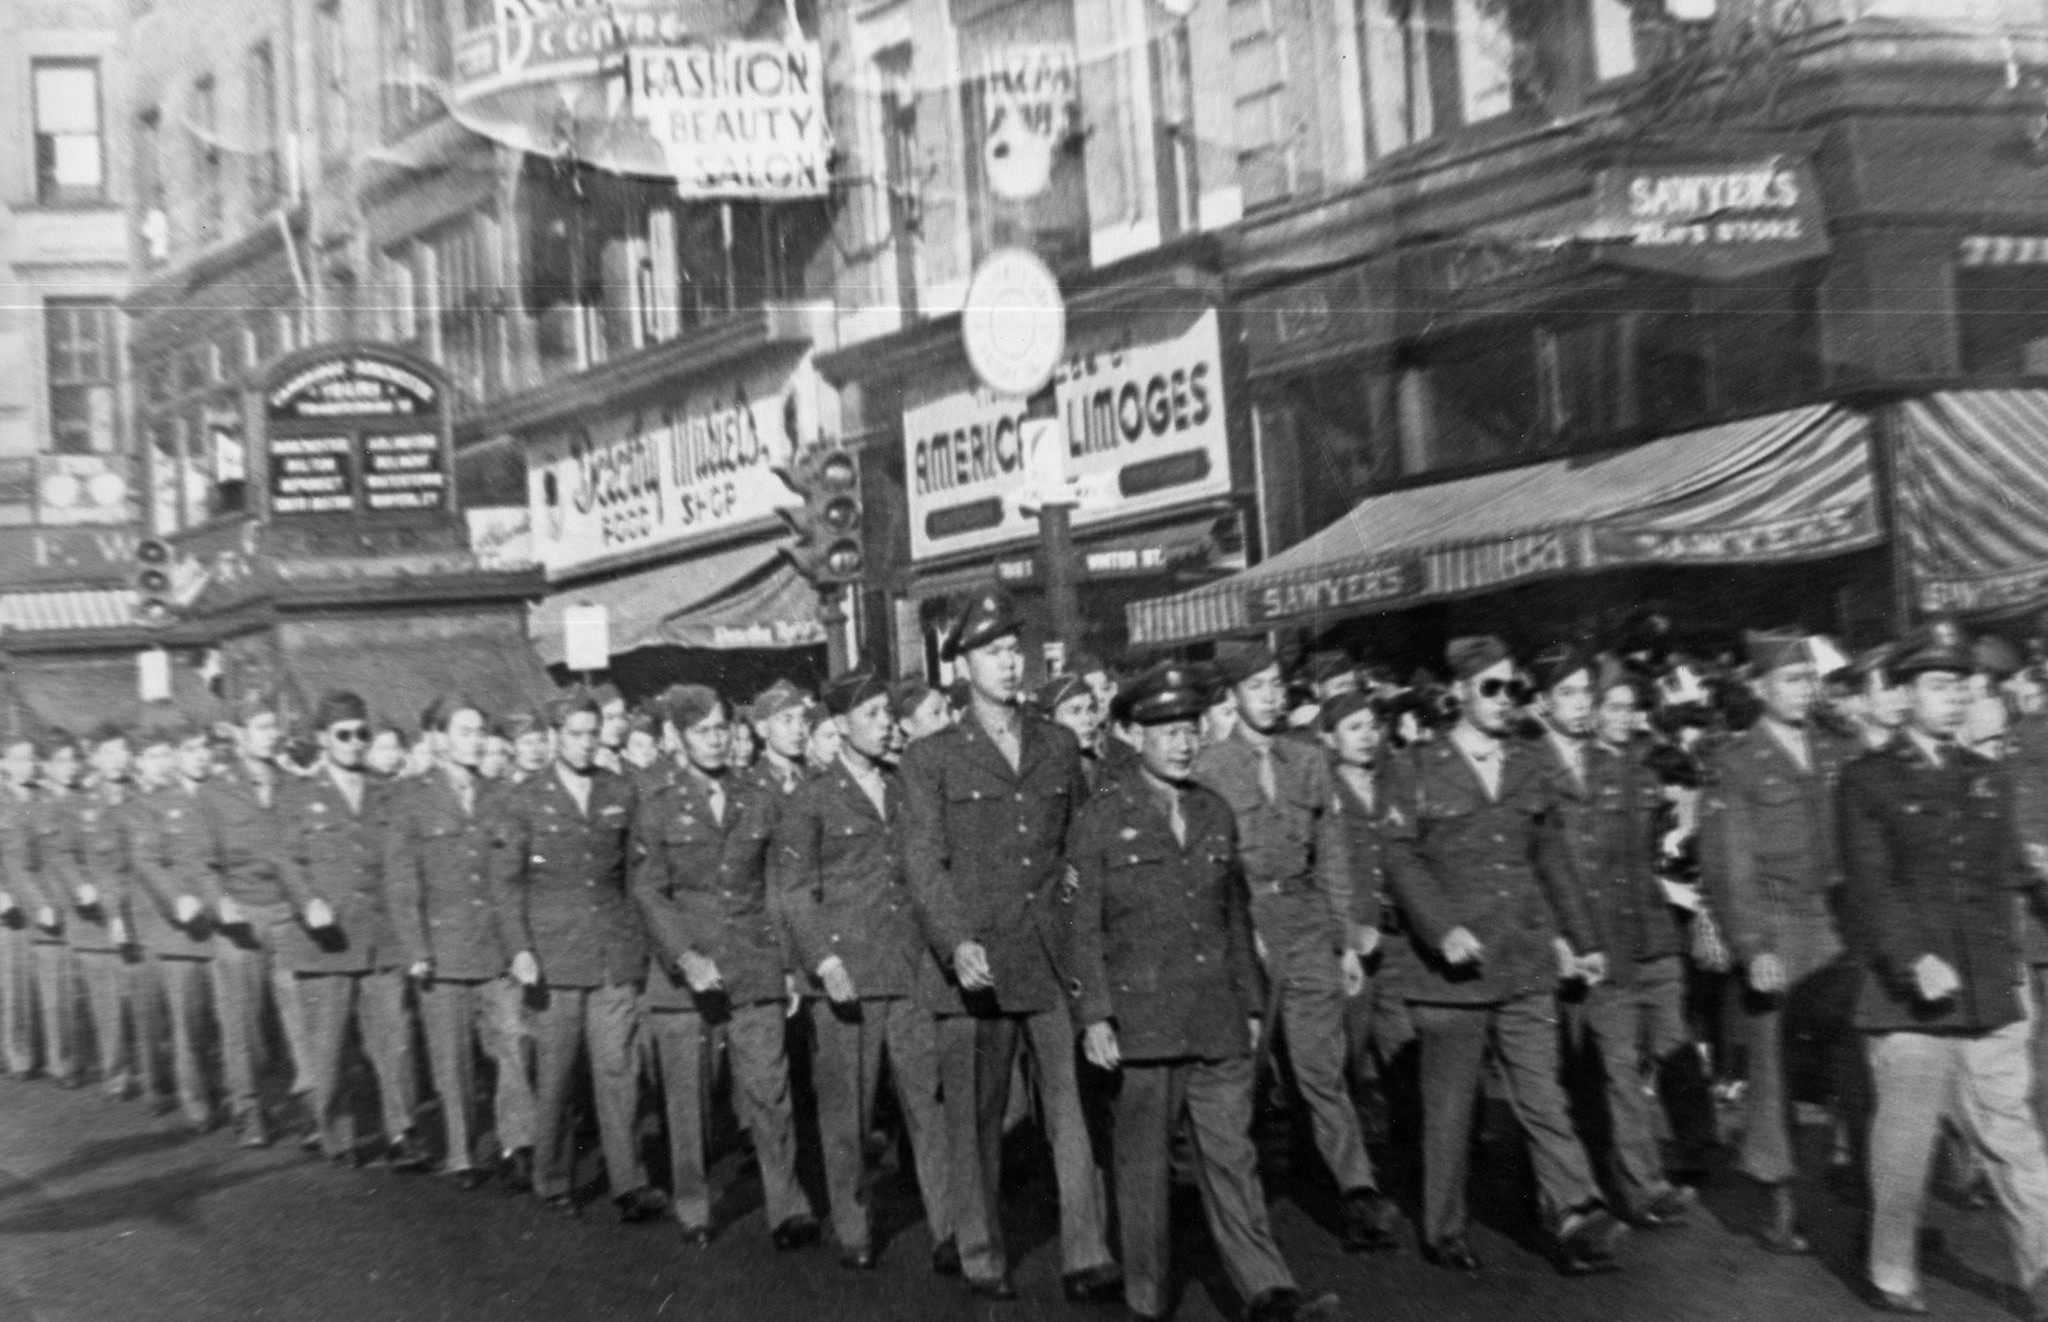 Chinese-American troops on parade for the Veterans Day holiday at the intersection of Tremont Street and Winter Street, Boston, Massachusetts, United States, 11 Nov 1945